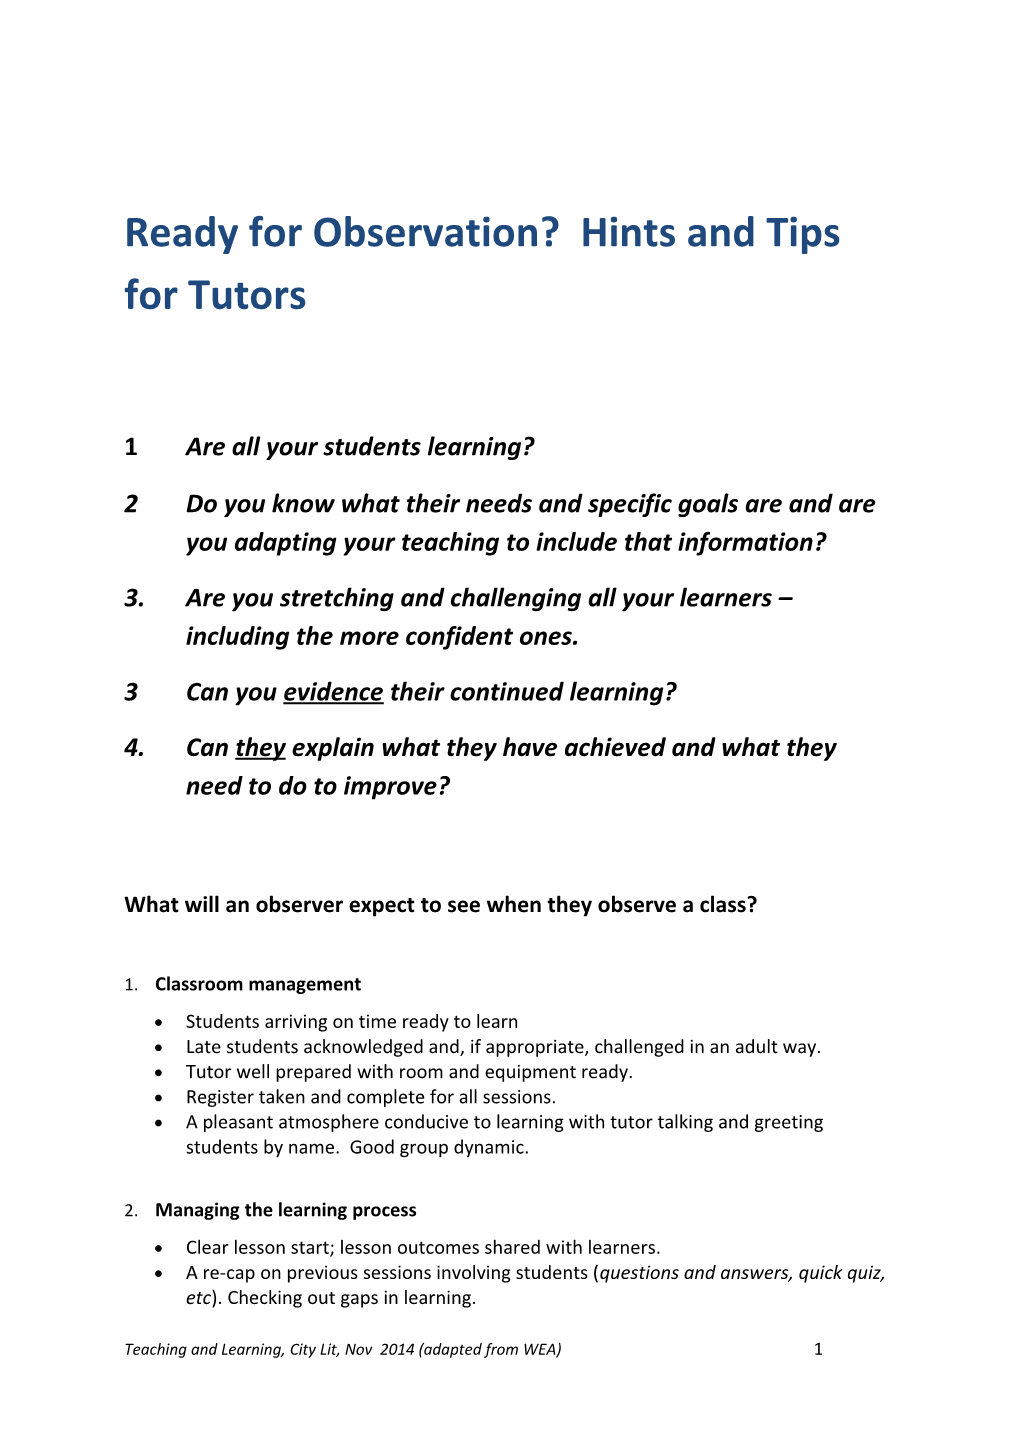 Ready for Observation? Hints and Tips for Tutors